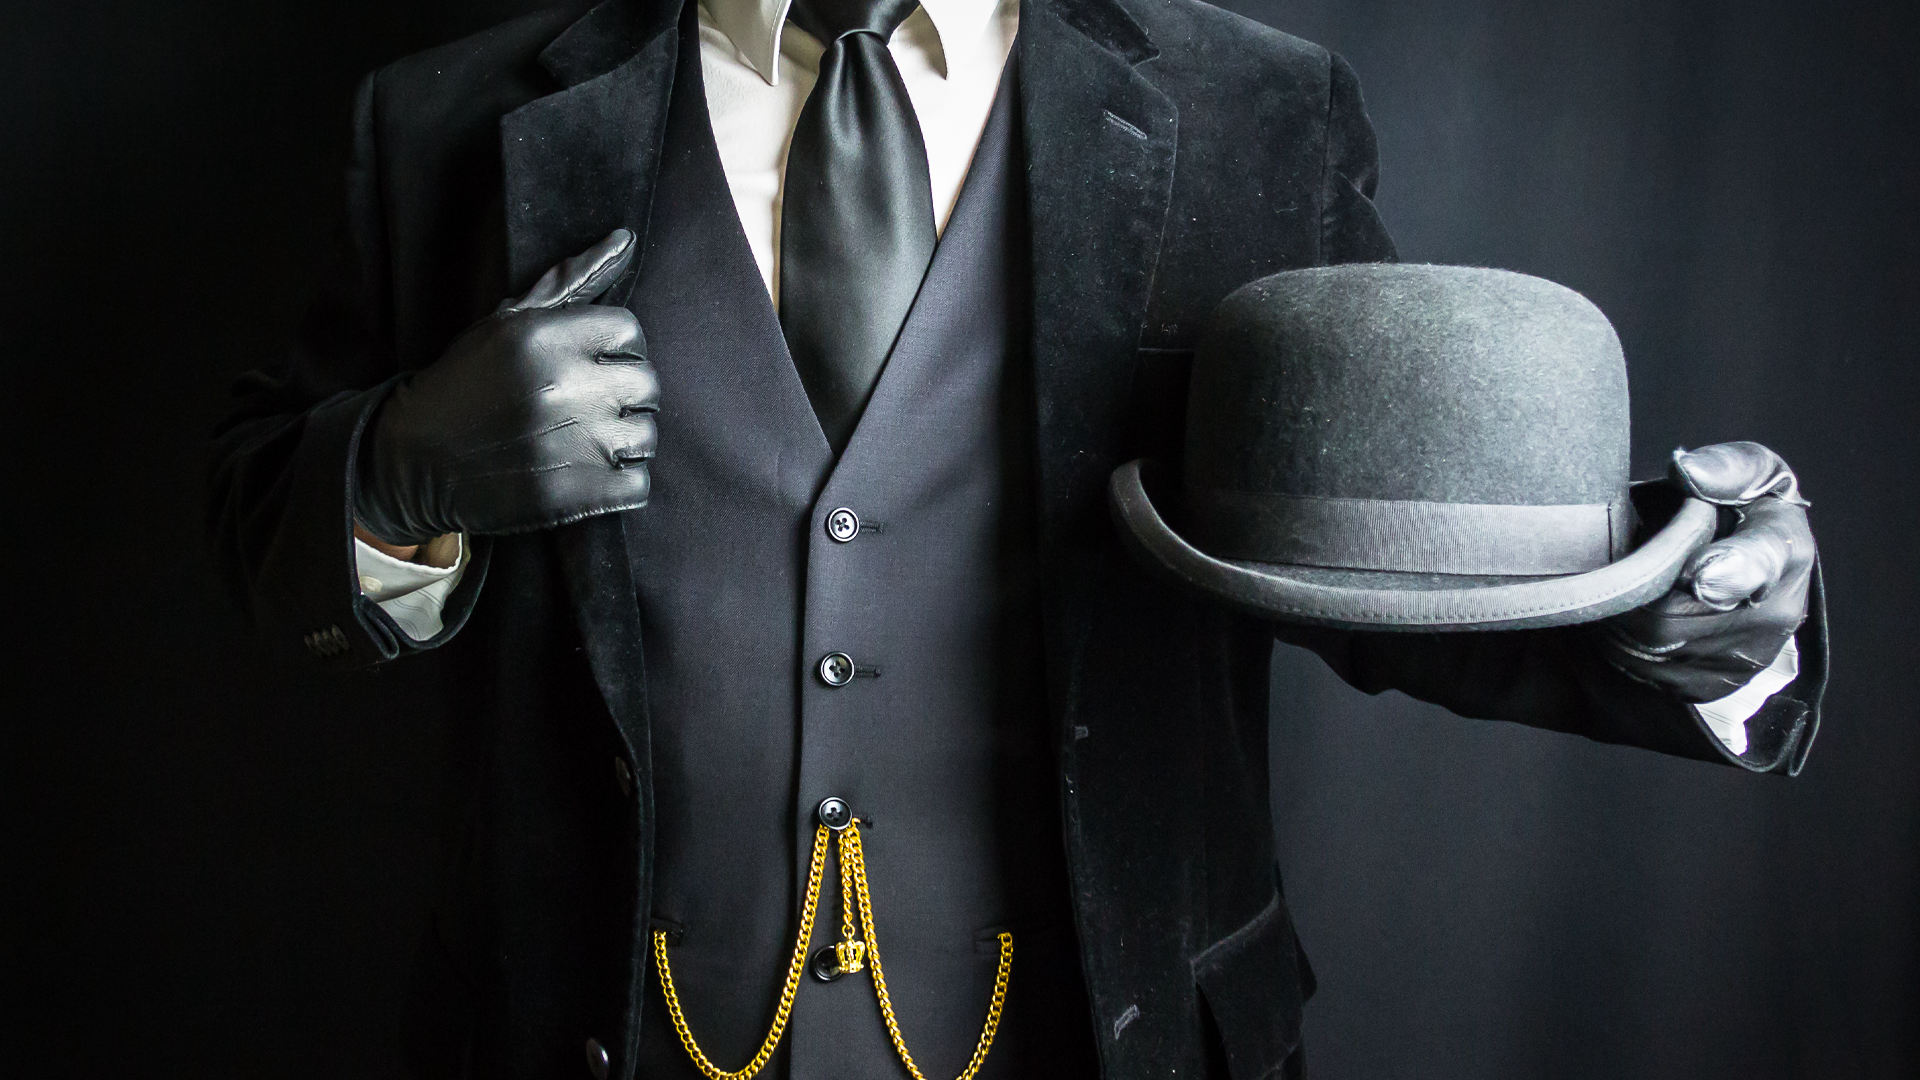 A person dressed in a suit and bowler hat